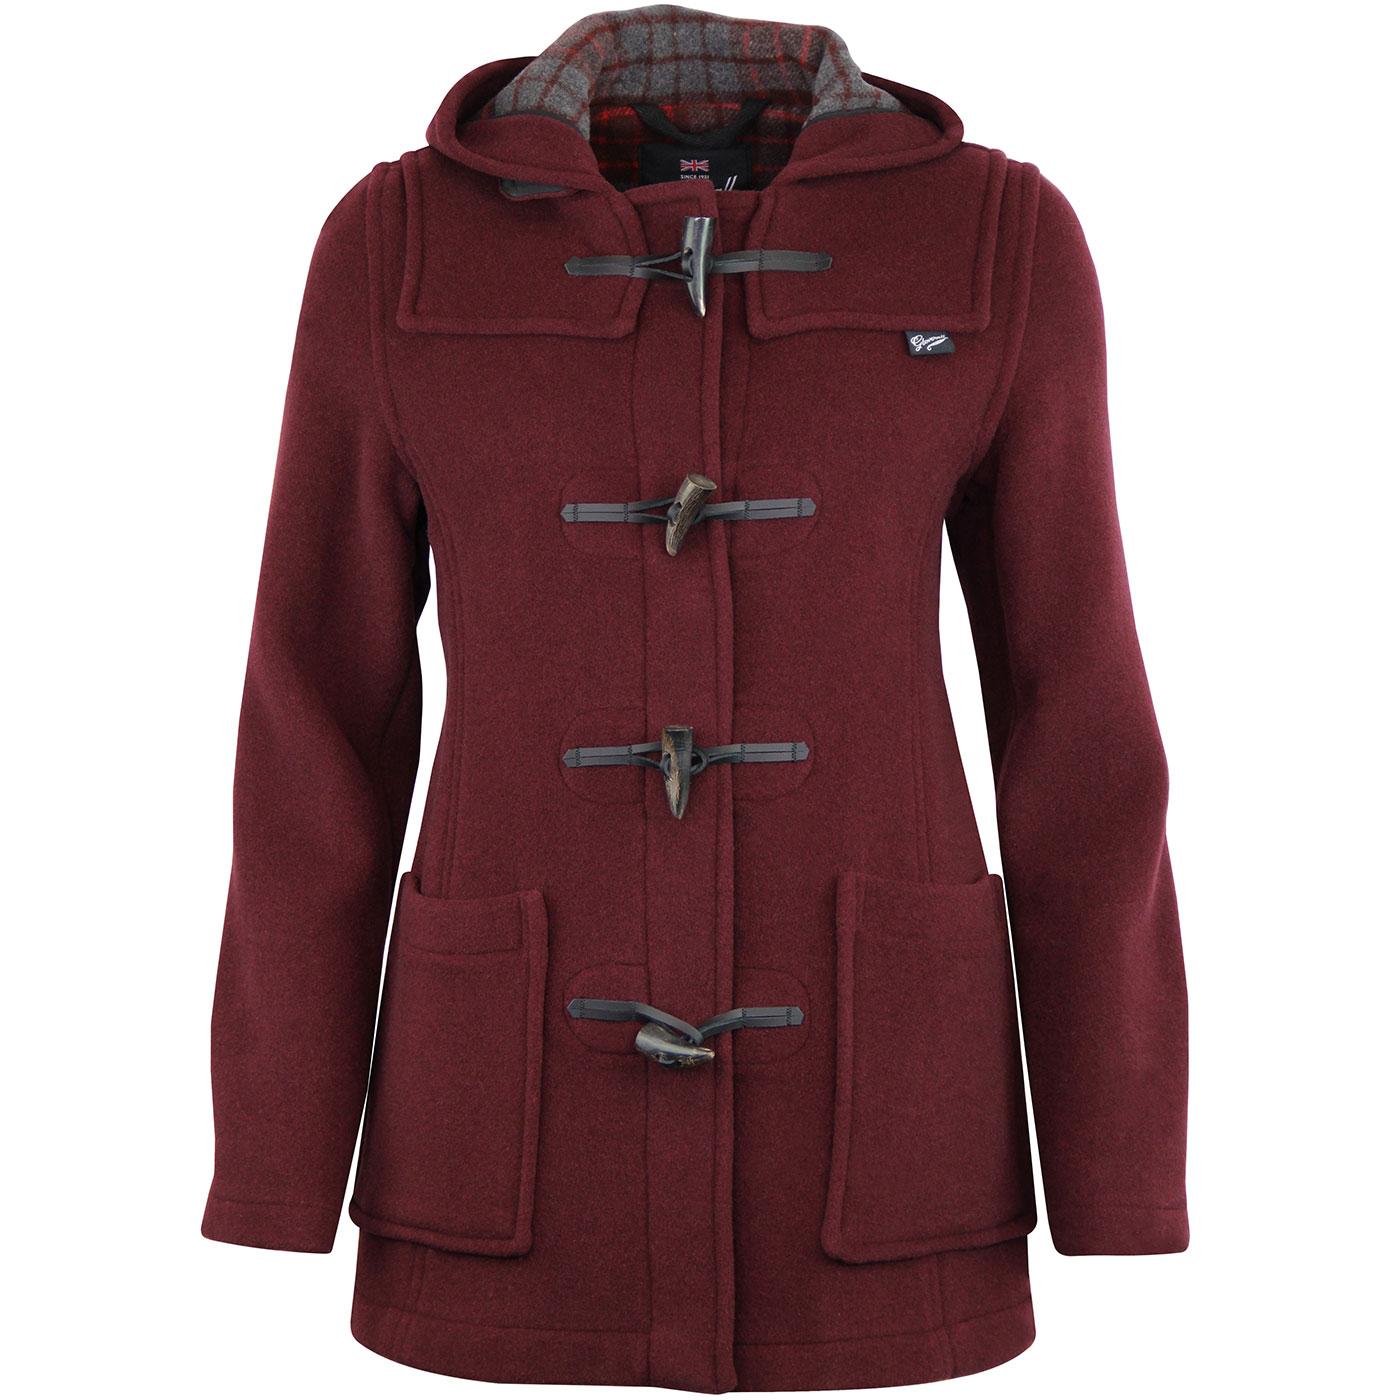 GLOVERALL Womens Short Slim fitted Duffle Coat in Burgundy